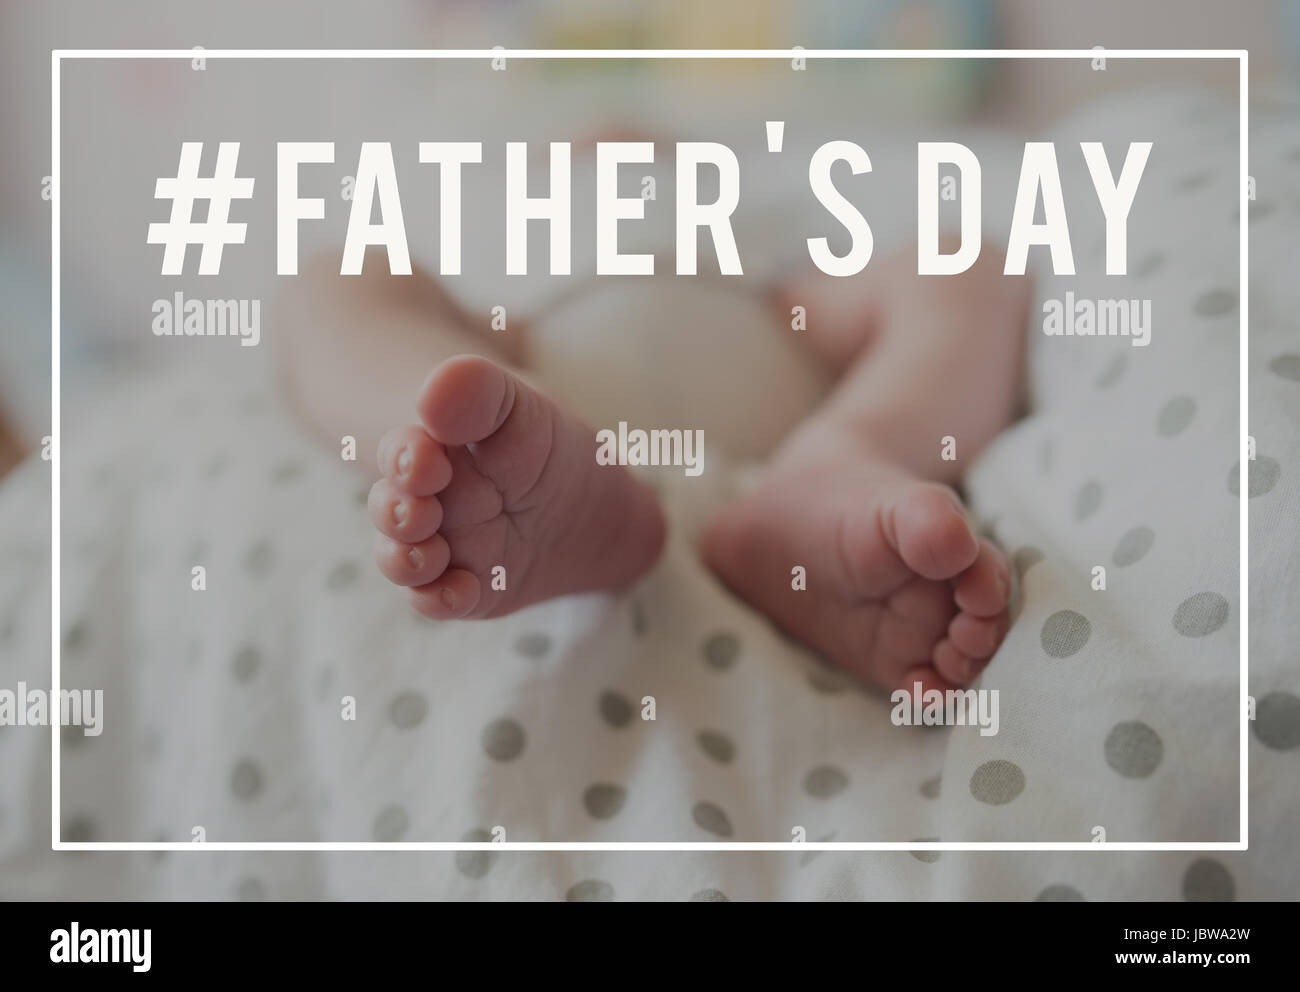 Feet of unrecognizable baby lying on bed. Fathers day. Stock Photo